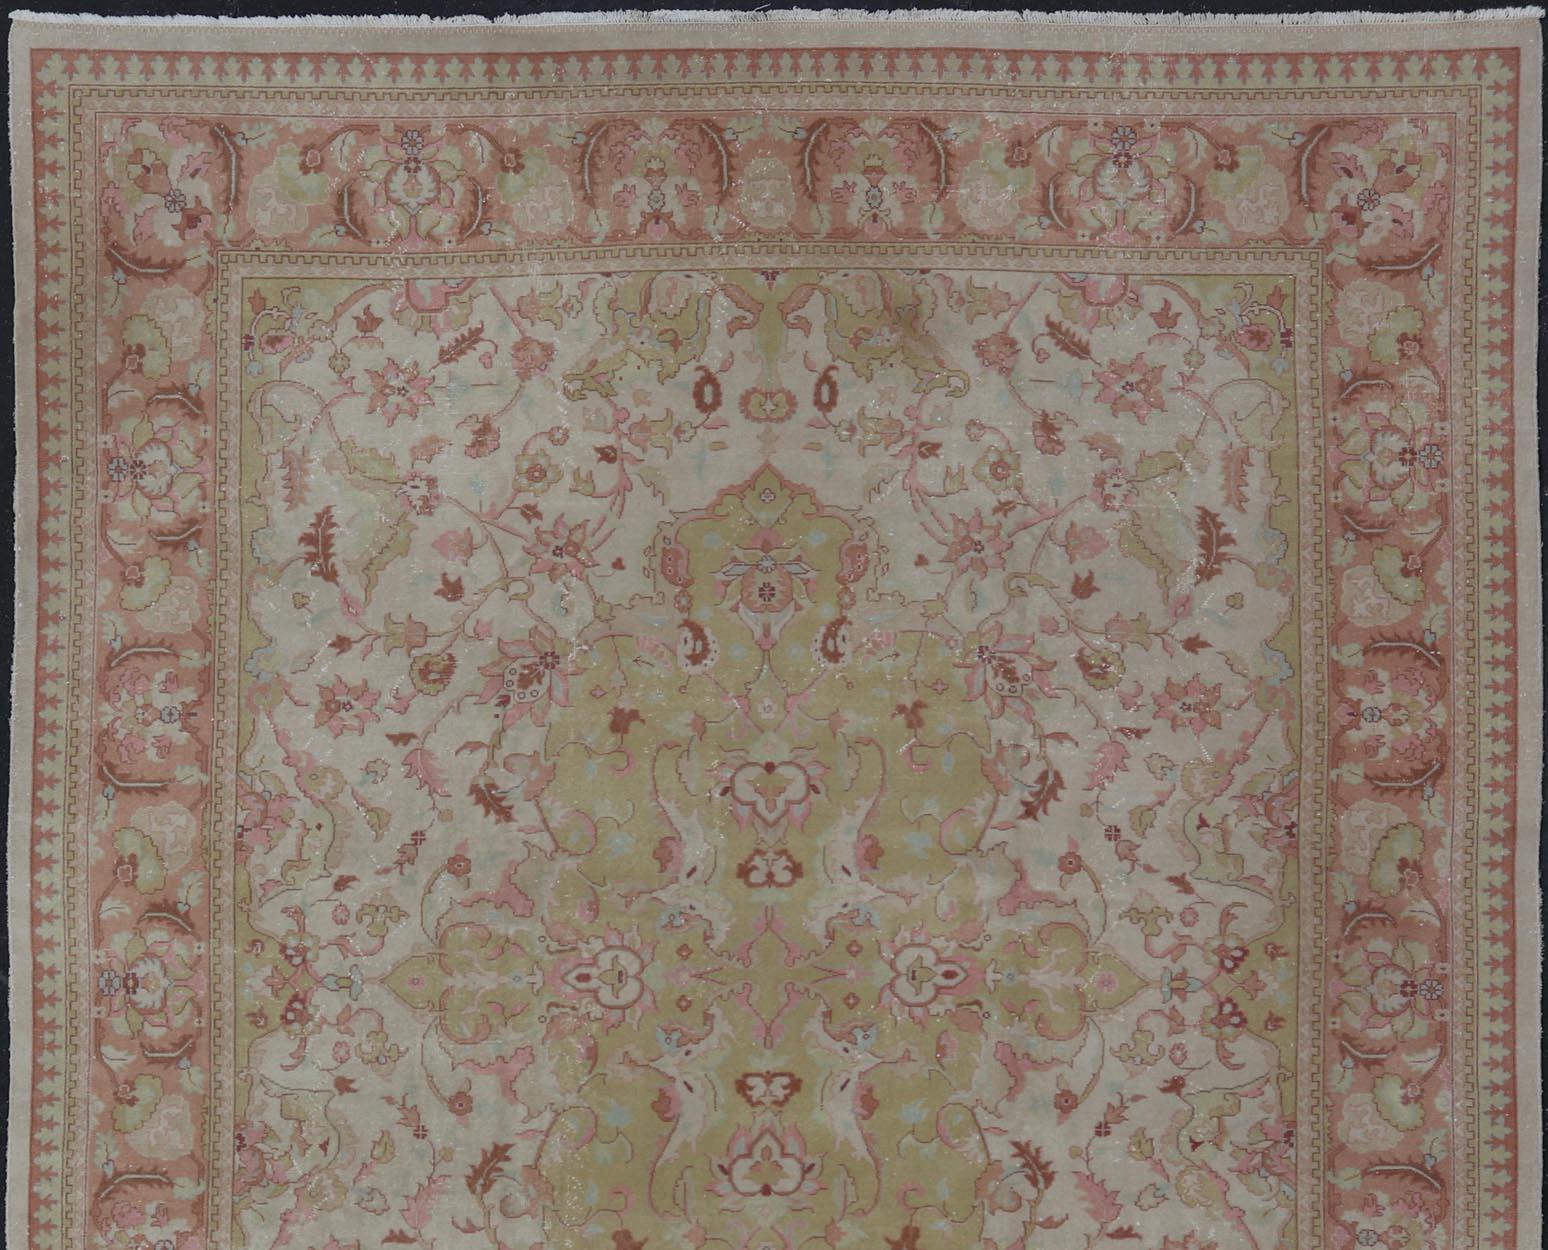 Keivan Woven Arts large Vintage Indian Amritsar rug with Floral in Ivory, Light Yellow Green, Salmon & Pink. Keivan Woven Arts / rug / G-0304 / Mid-20th Century / 1940 circa / Antique Amritsar

Measures: 11'9 x 14'5.   
     
A Classic design in a